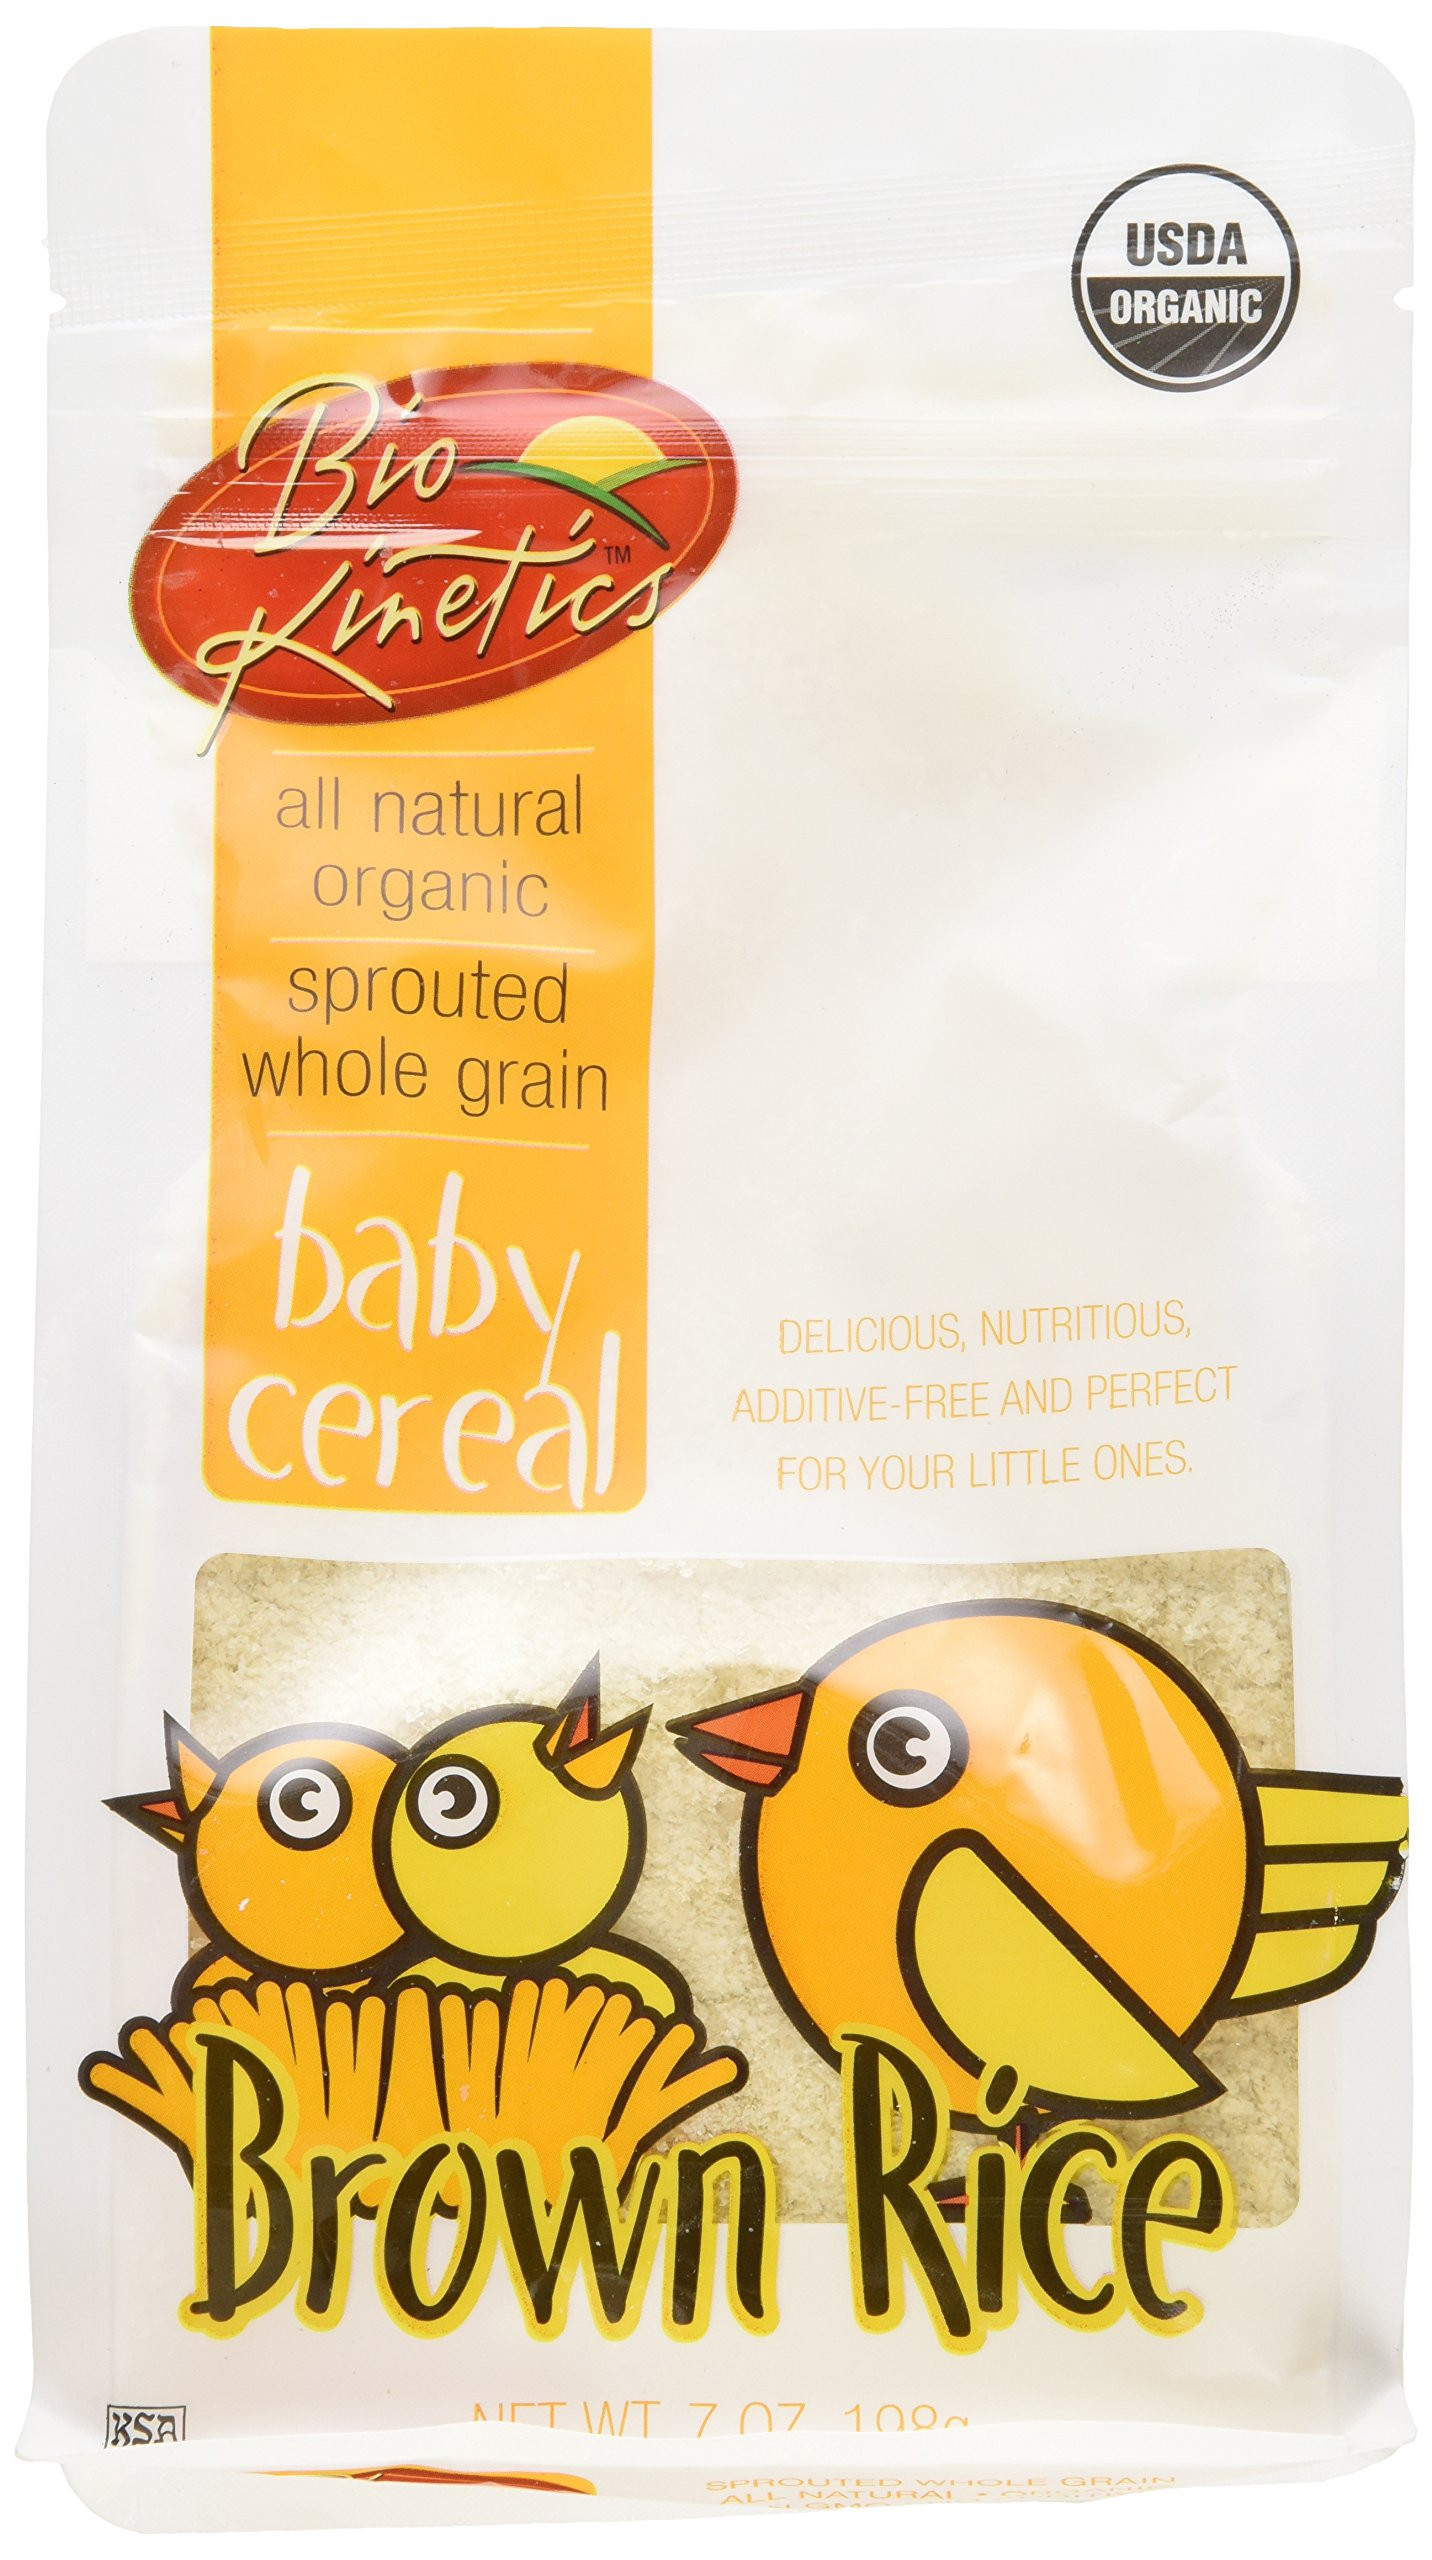 Quinoa Baby Cereal
 Gluten Free Organic Quinoa Baby Cereal Made with Sprouted